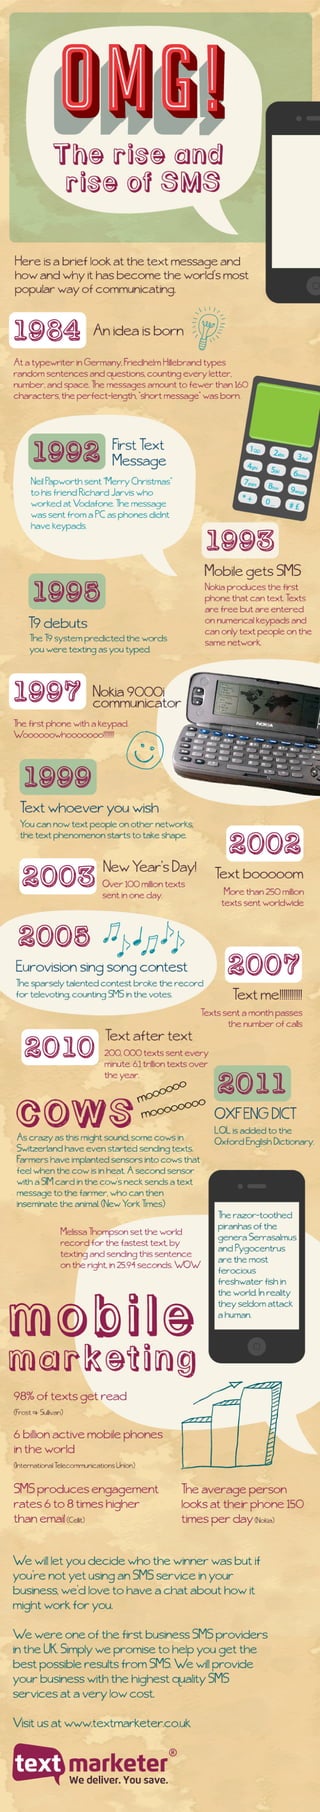 OMG! The rise and rise of sms